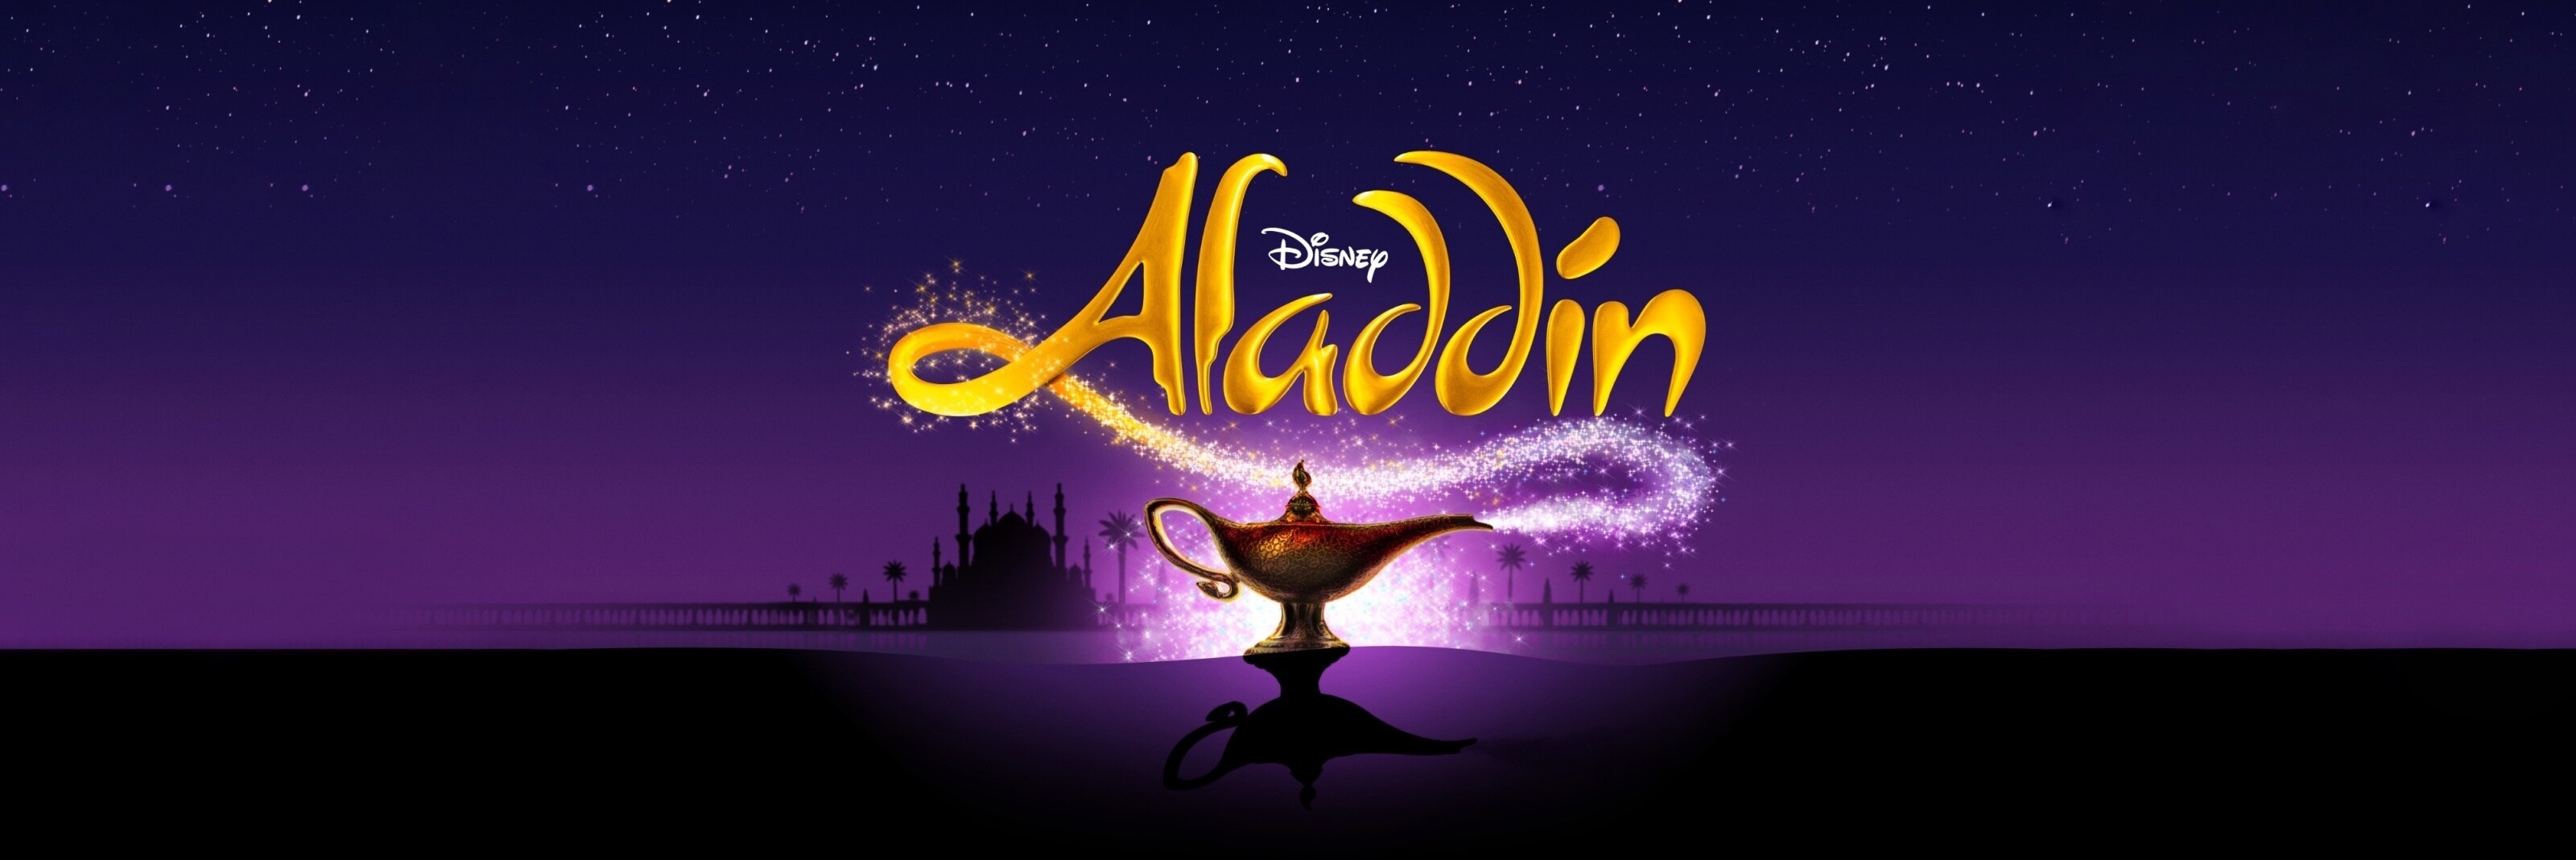 Find out more about Disney's Aladdin the Musical